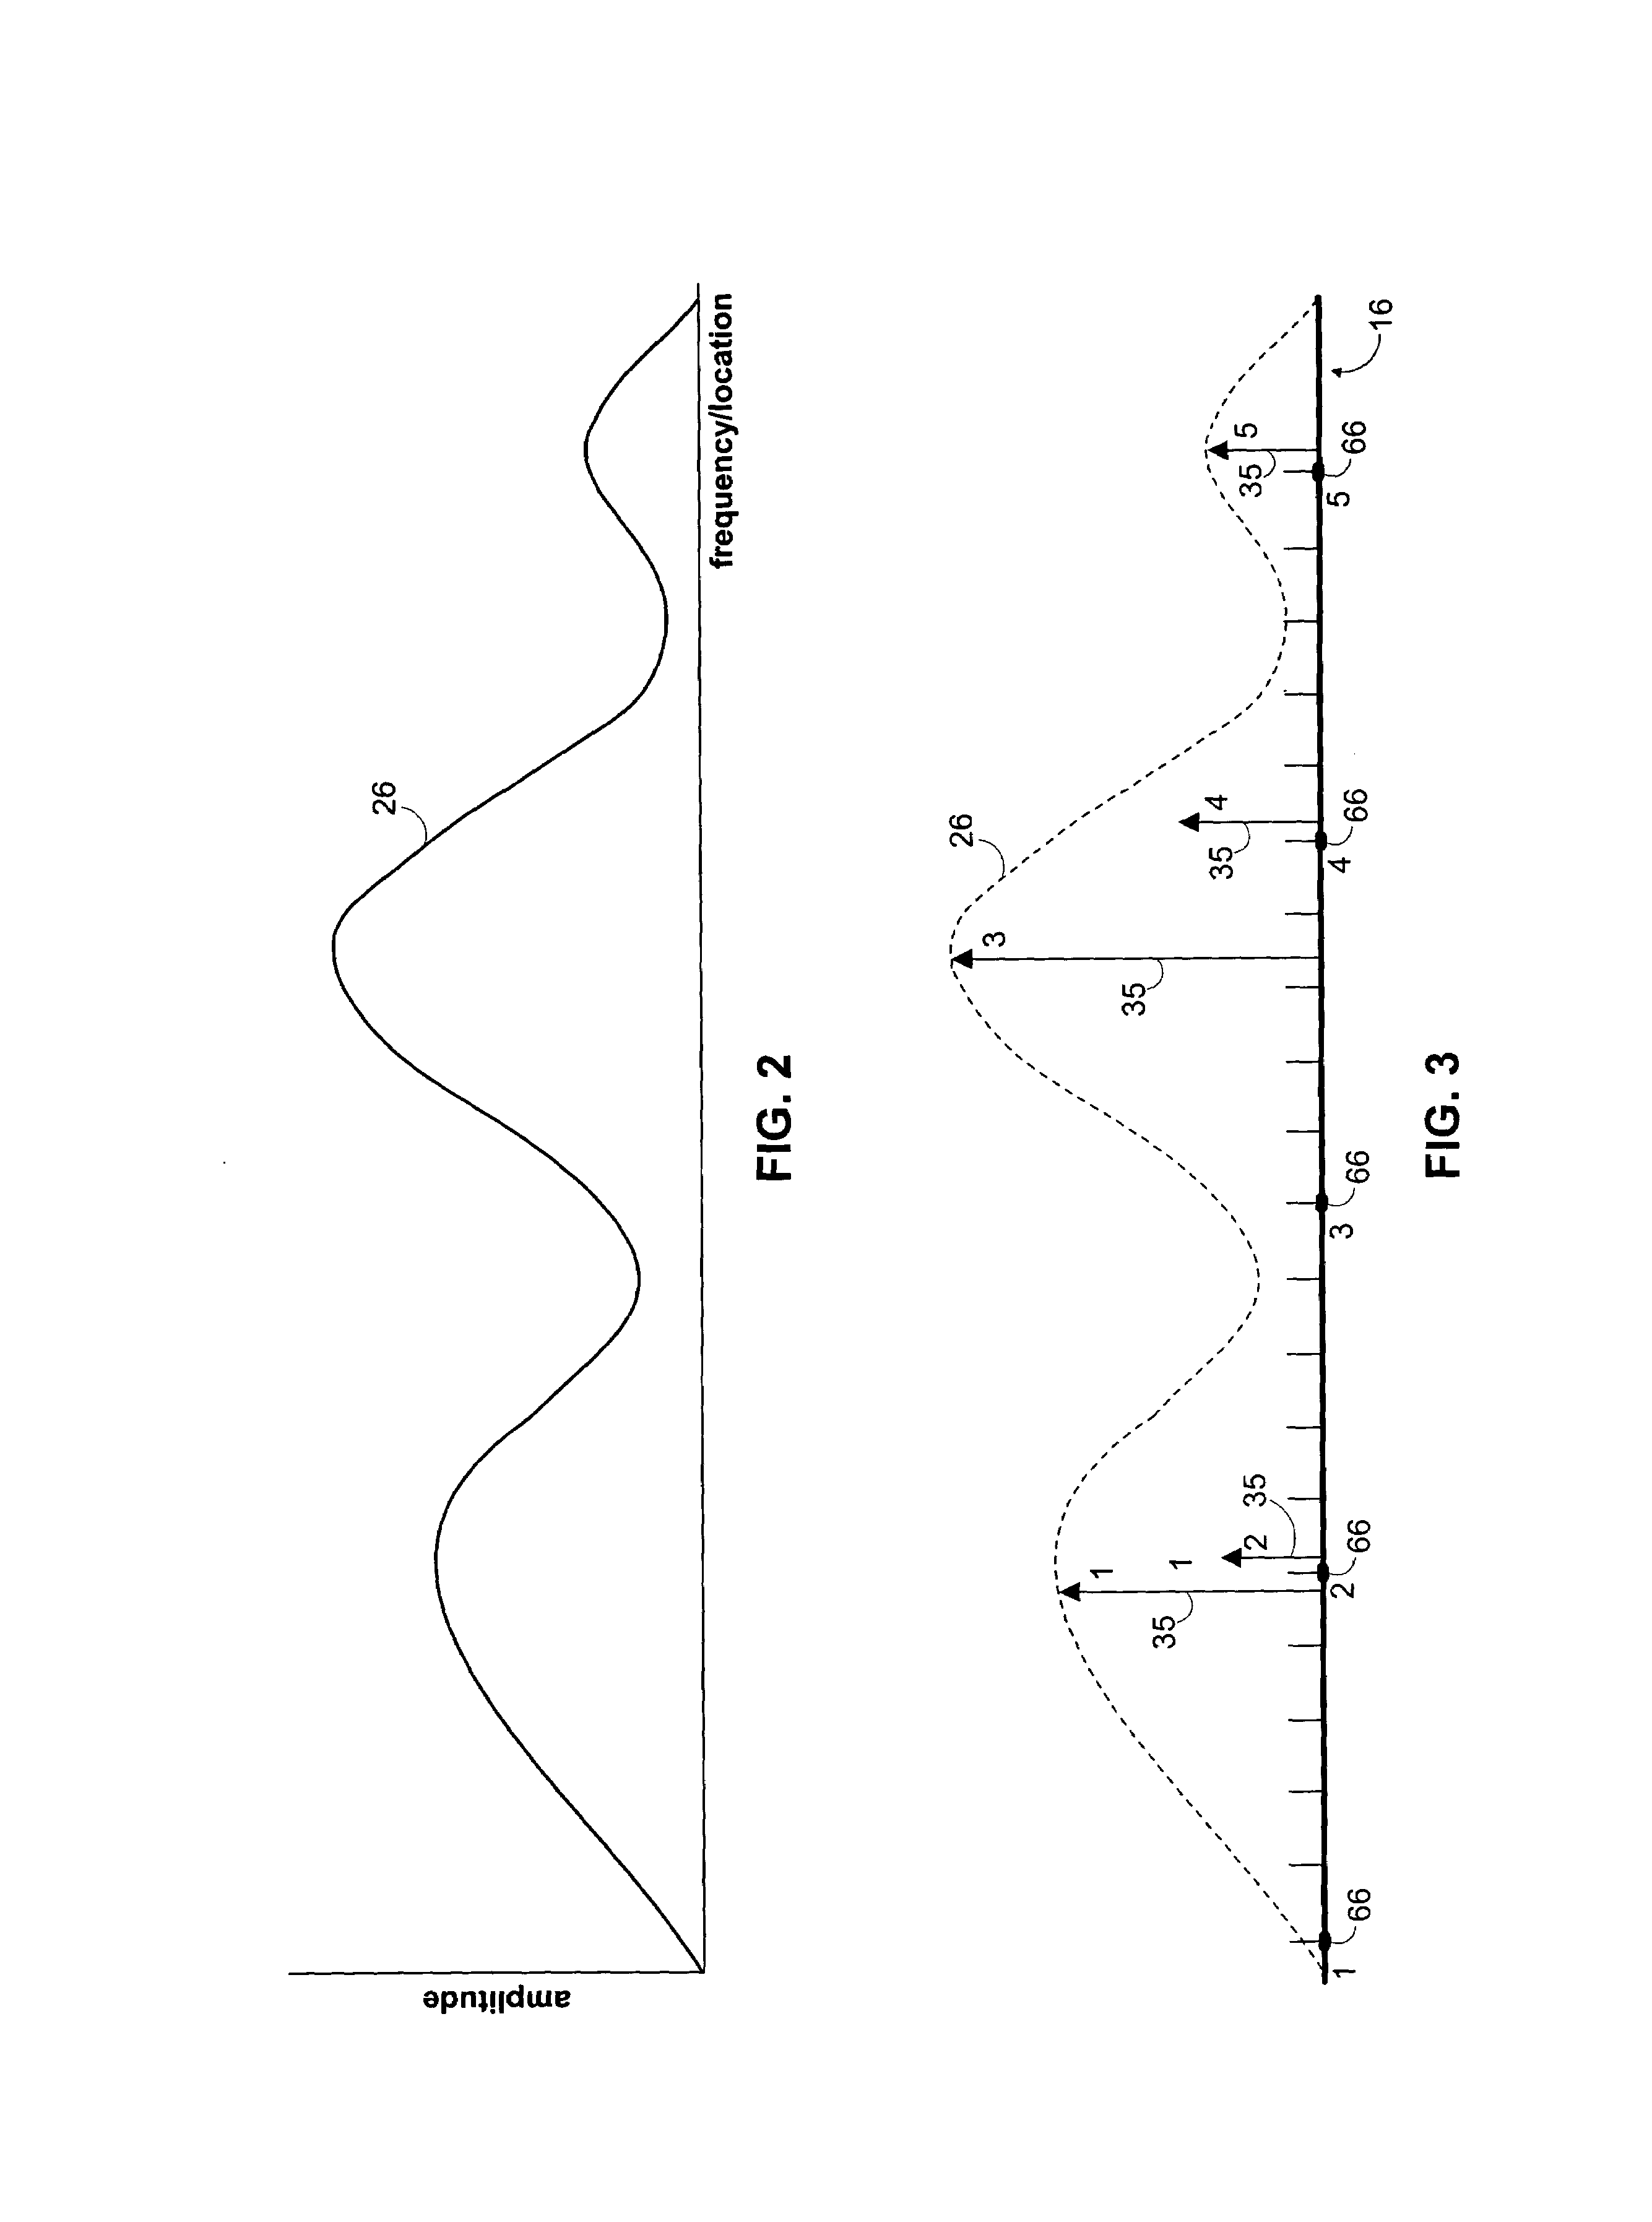 Sound processing and stimulation systems and methods for use with cochlear implant devices